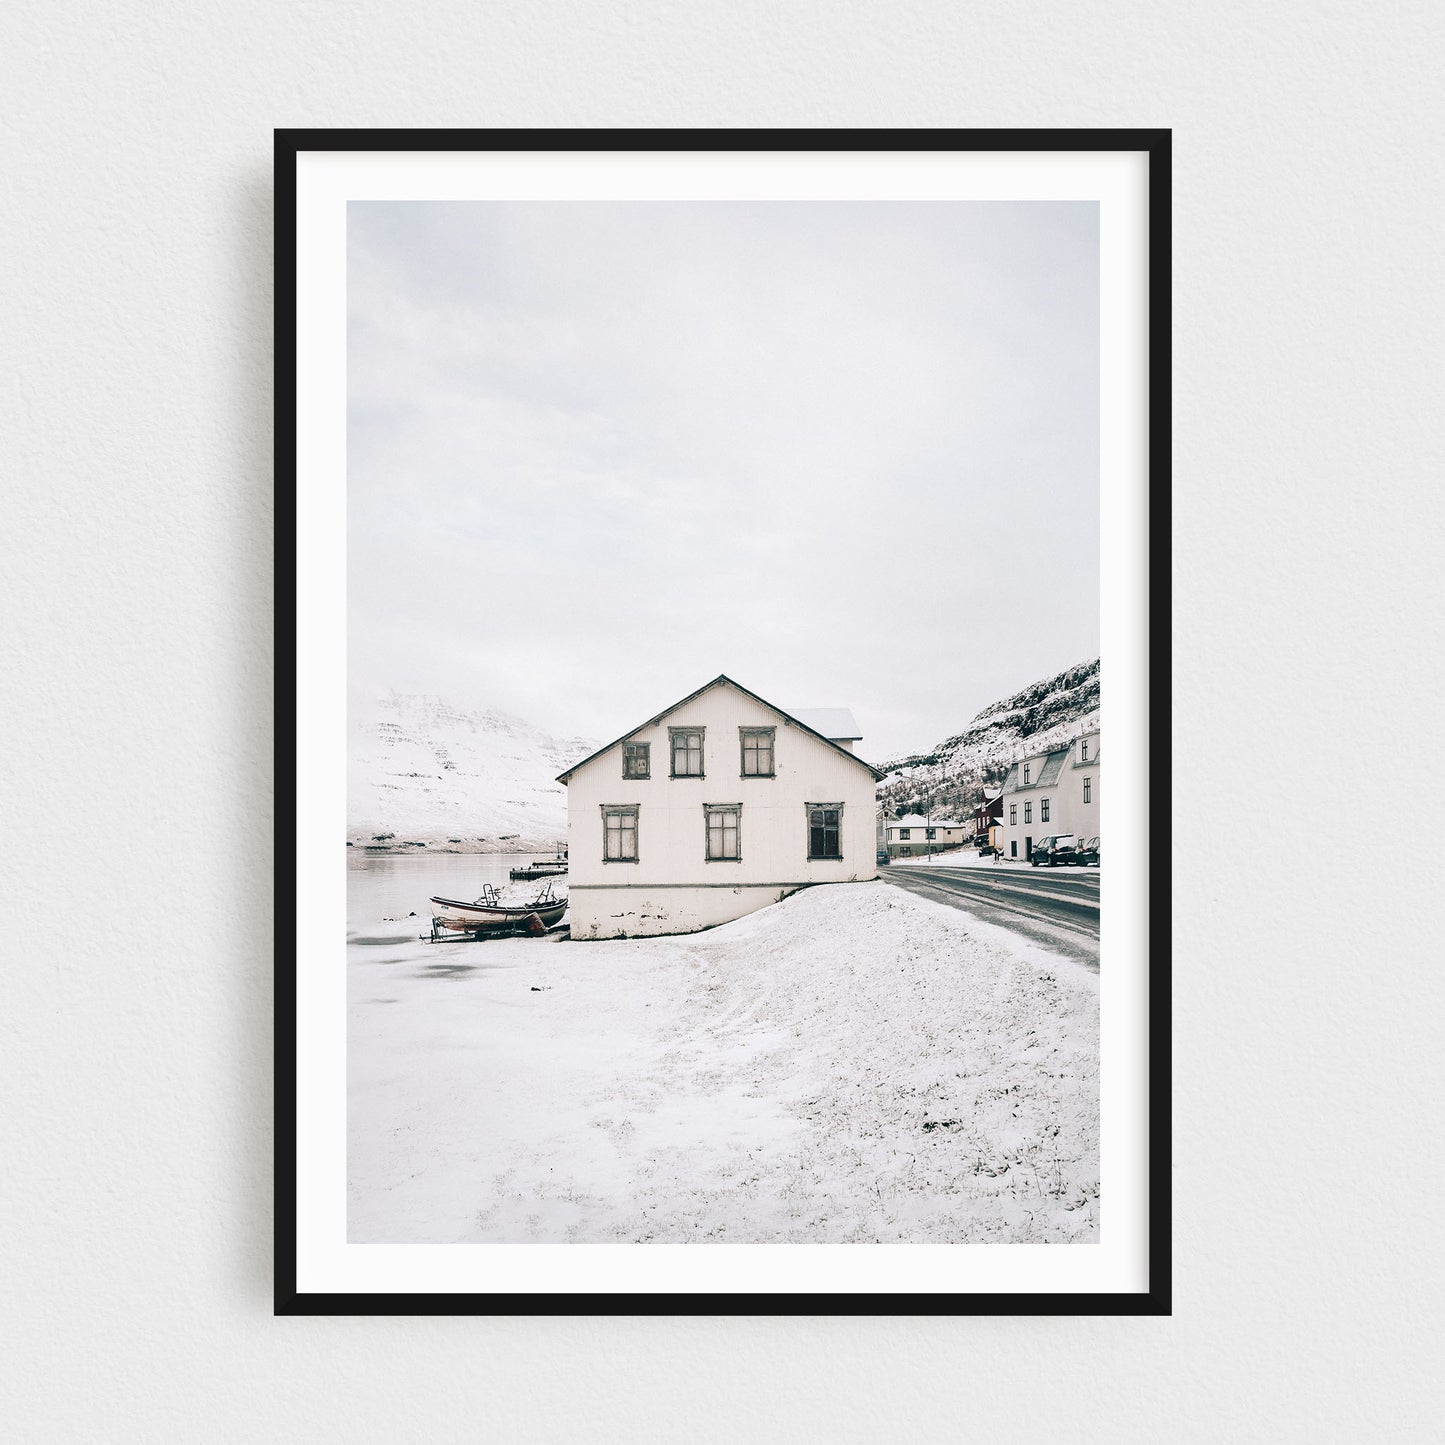 Iceland fine art photography print featuring Seydisfjordur house by the fjord in winter